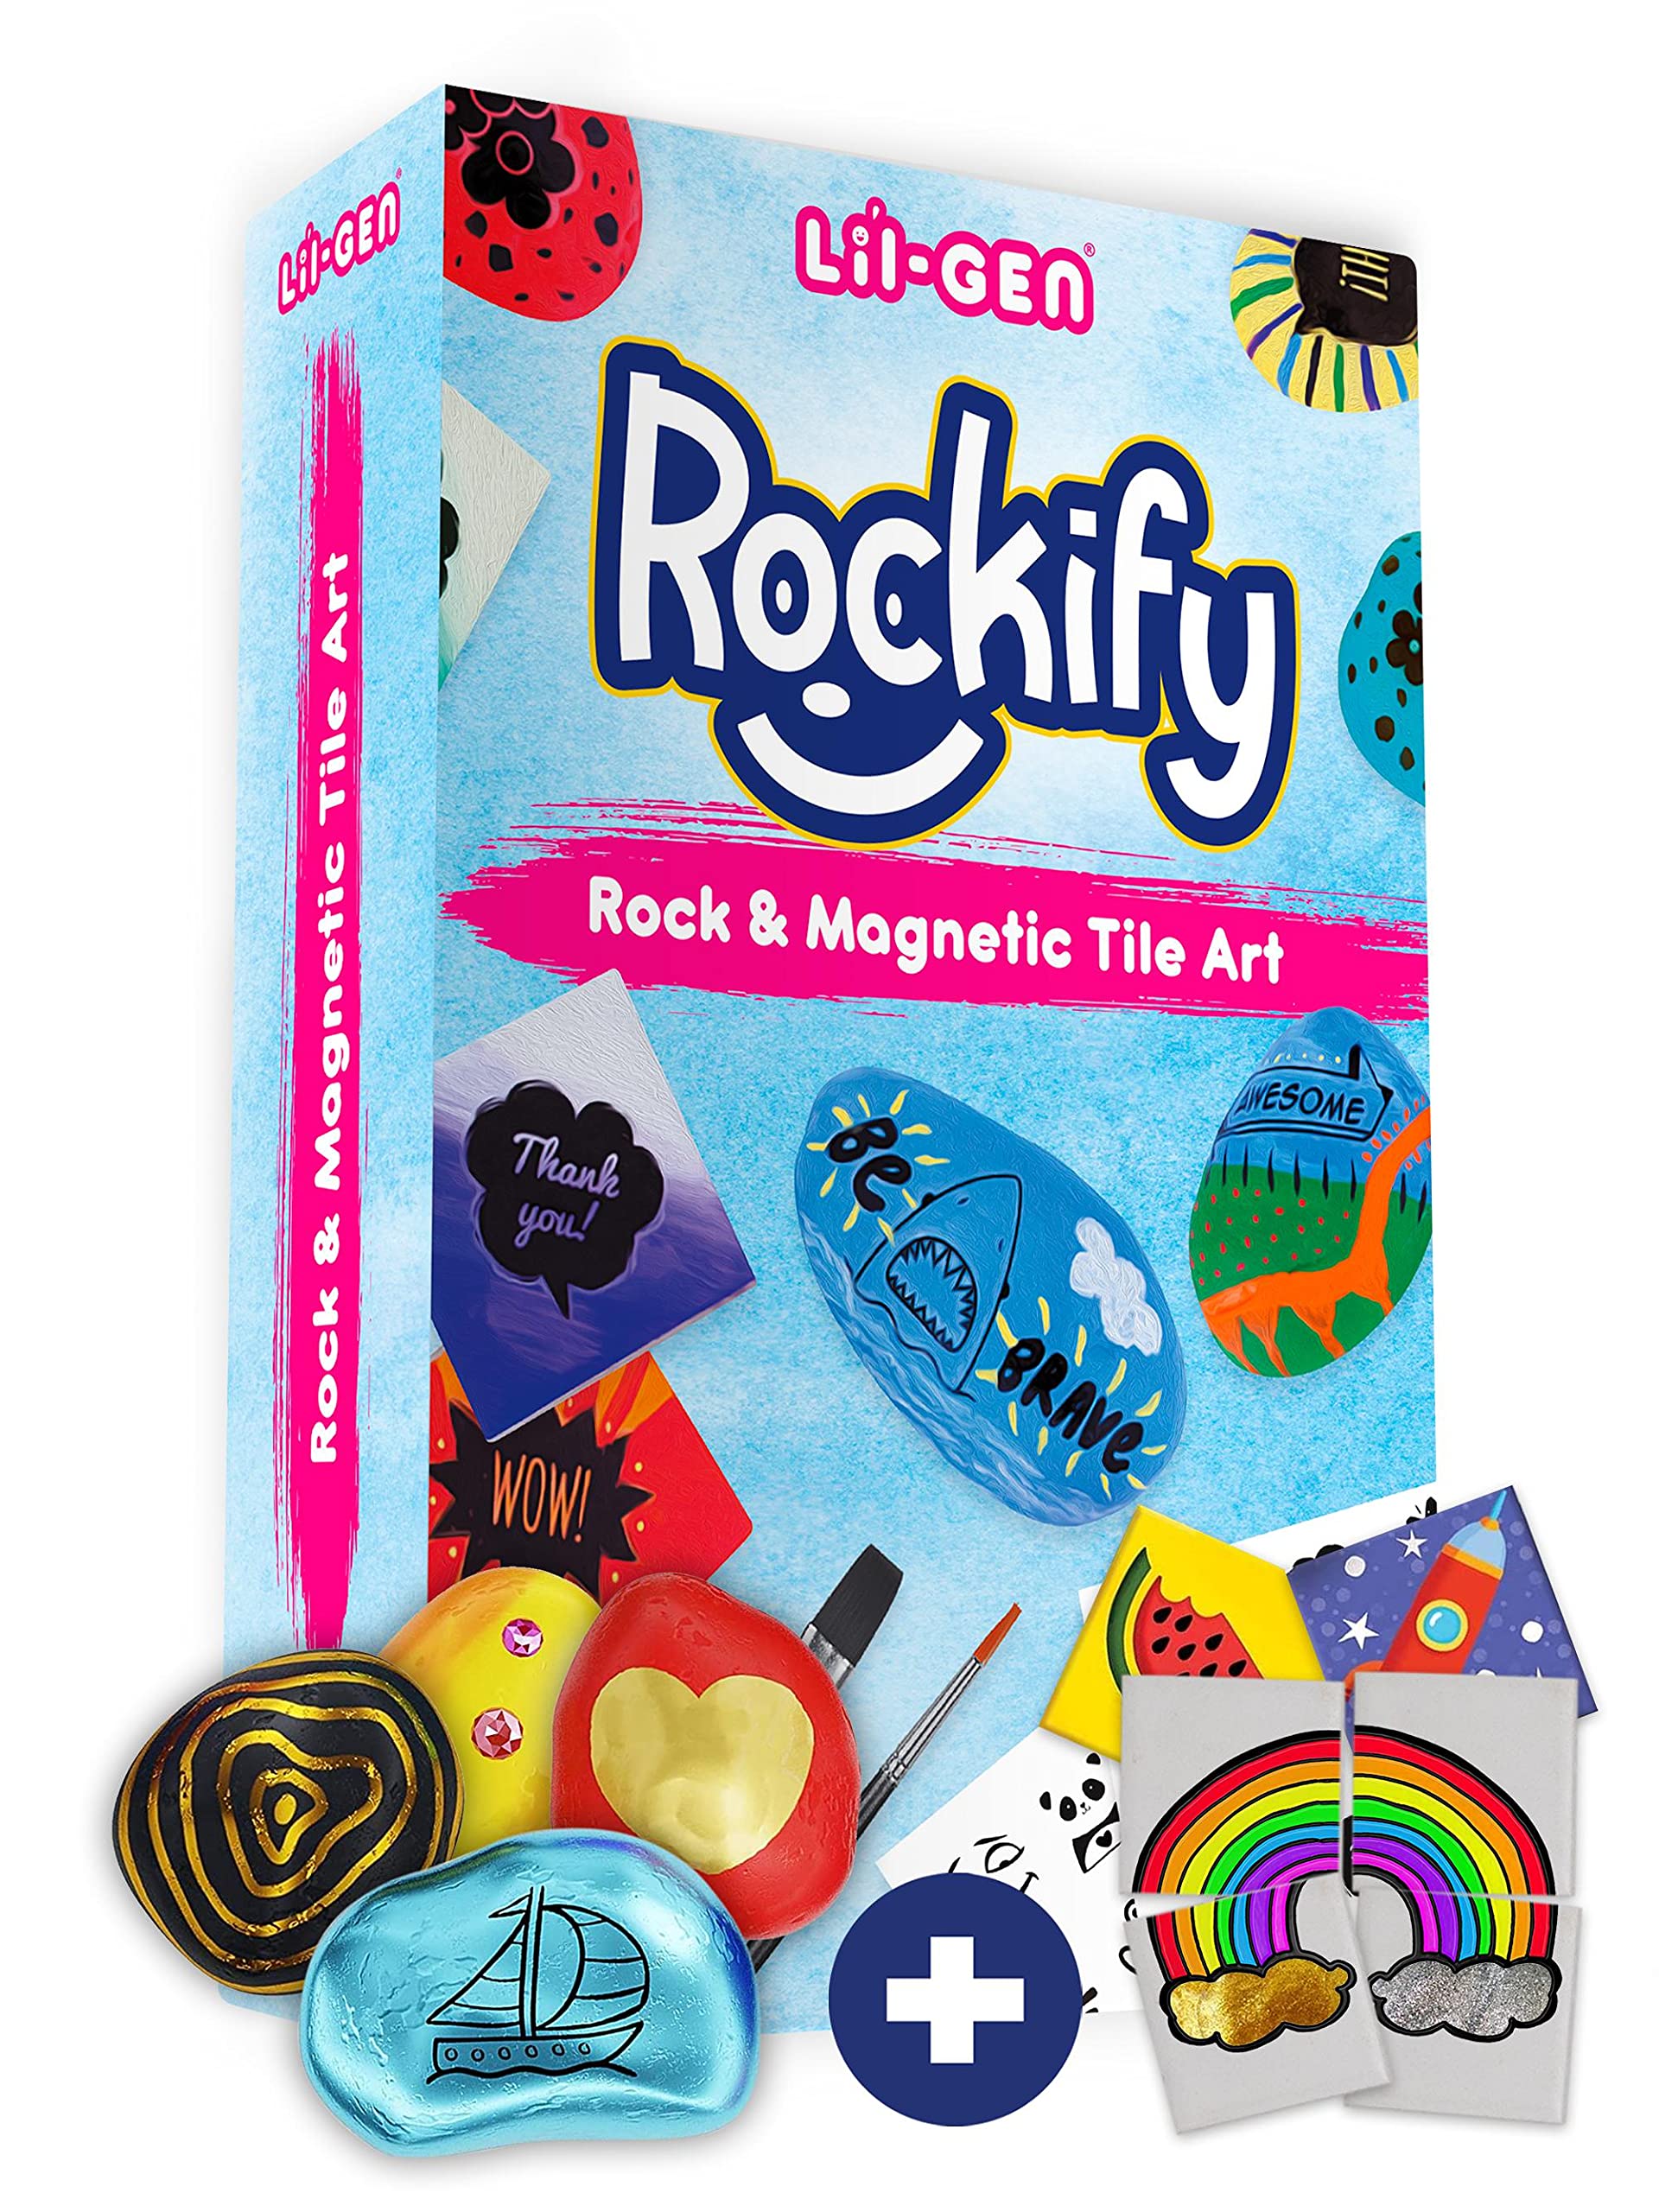 Li'l Gen Rock Painting Kit for Kids and Mini Ceramic Tile Painting Kit - Arts and Crafts for Kids Ages 6-12 - DIY Craft Kits for Boys and Girls - Crafts Activities & Art Supplies - Kids Gift Art Set